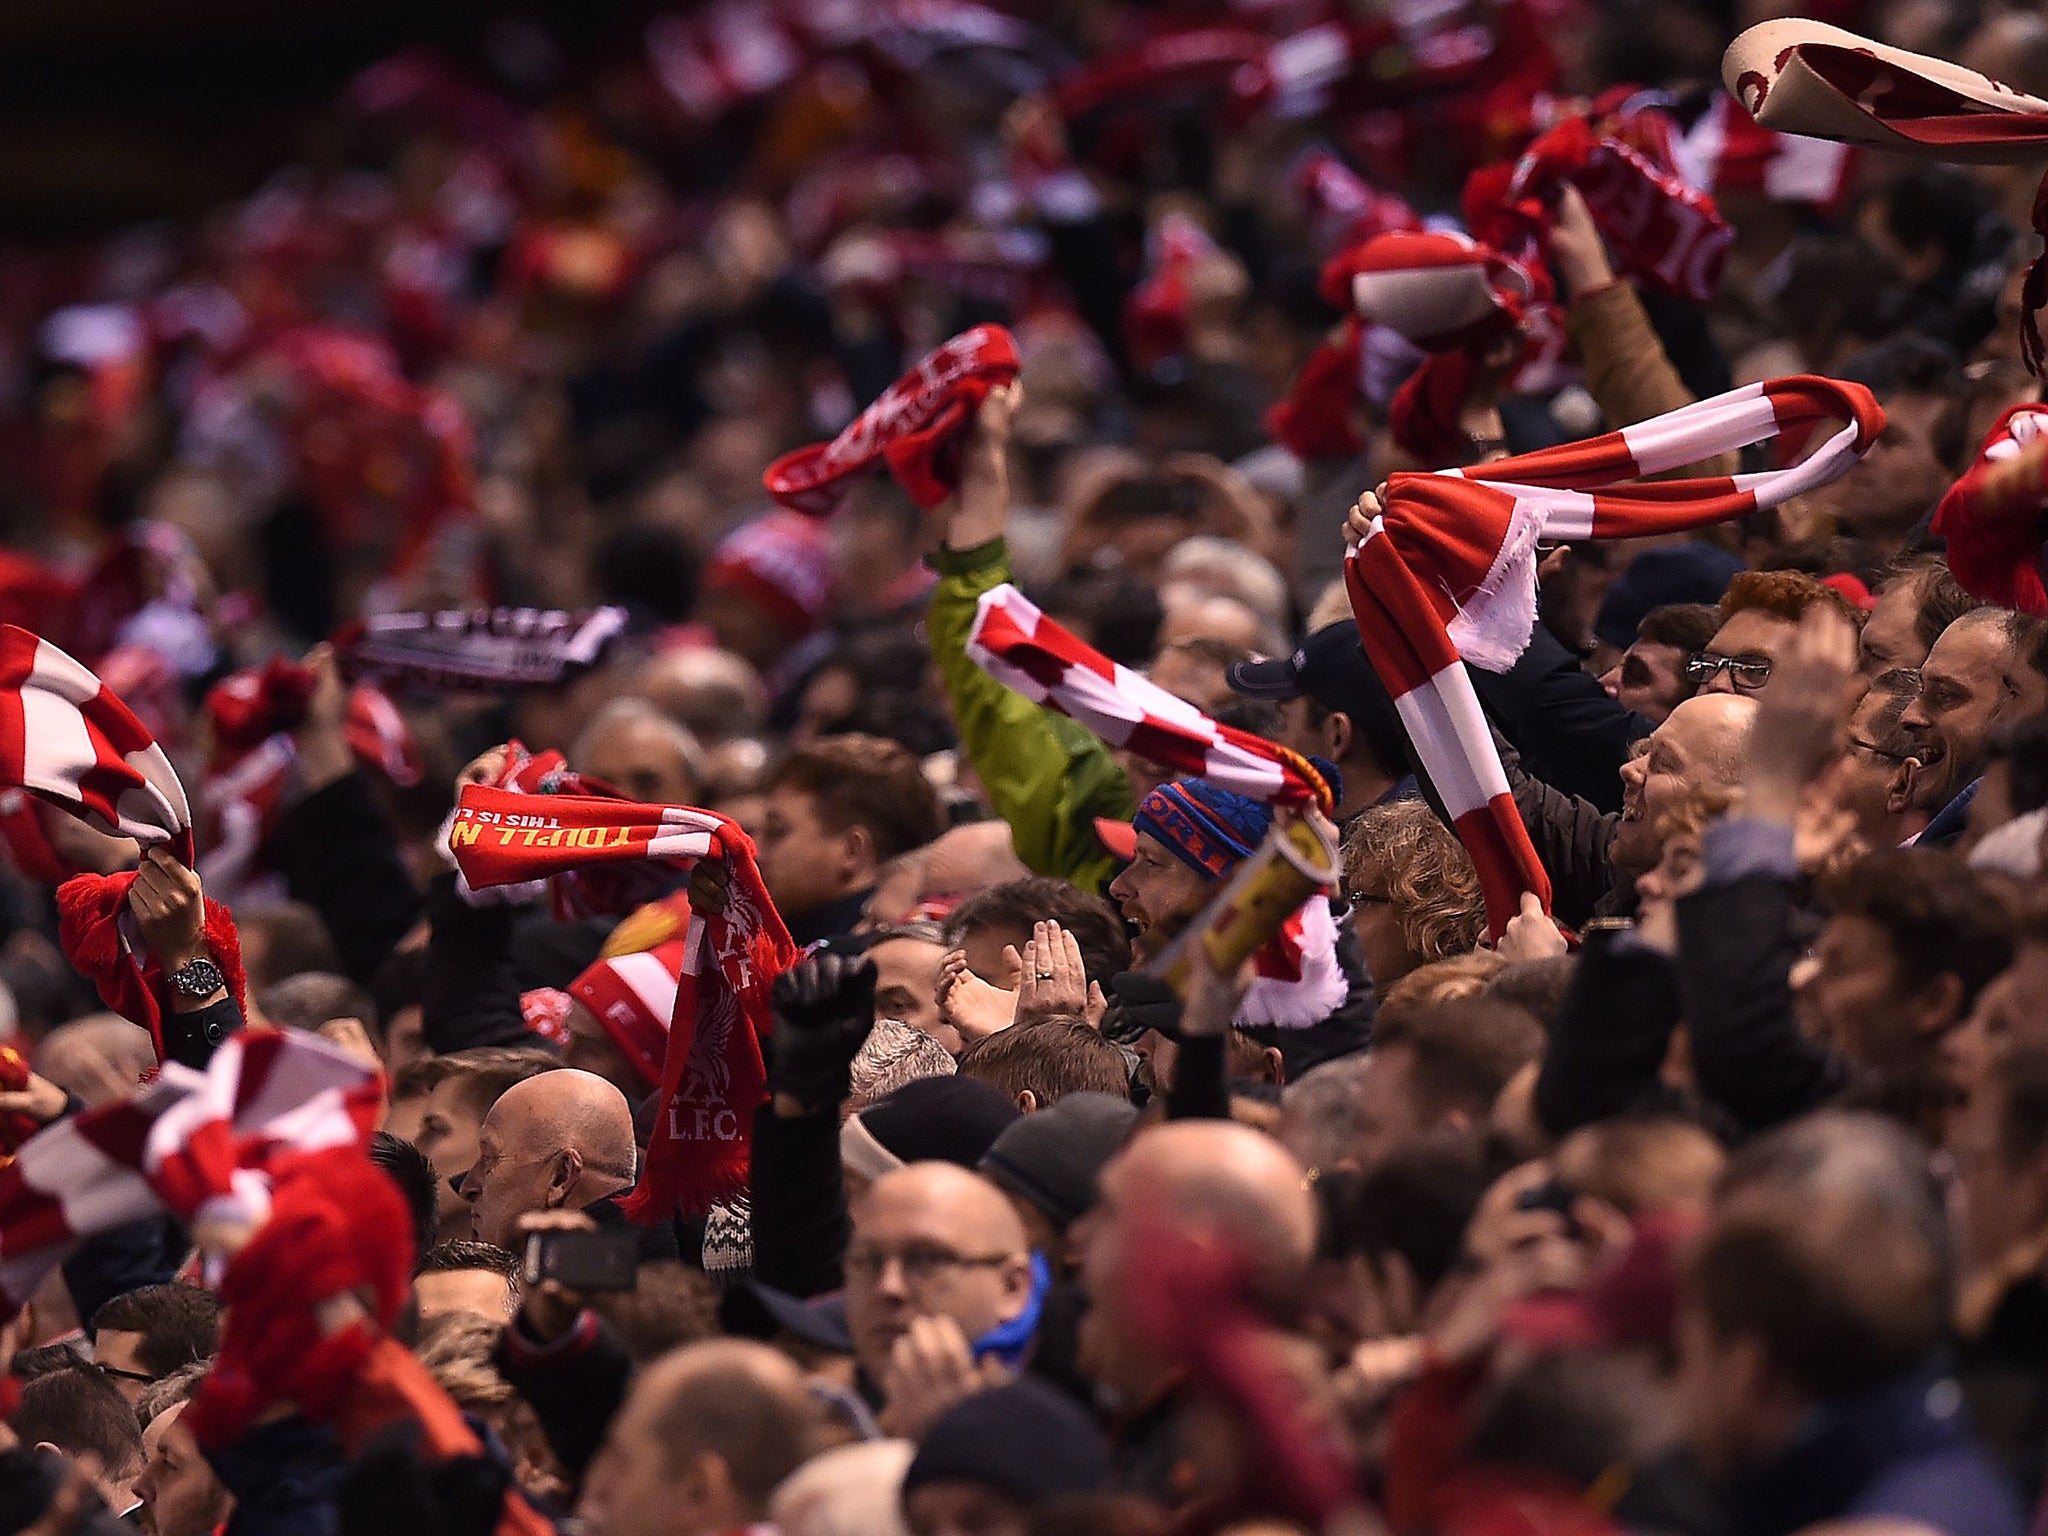 Liverpool supporters wave scarves during Thursday's victory over Manchester United